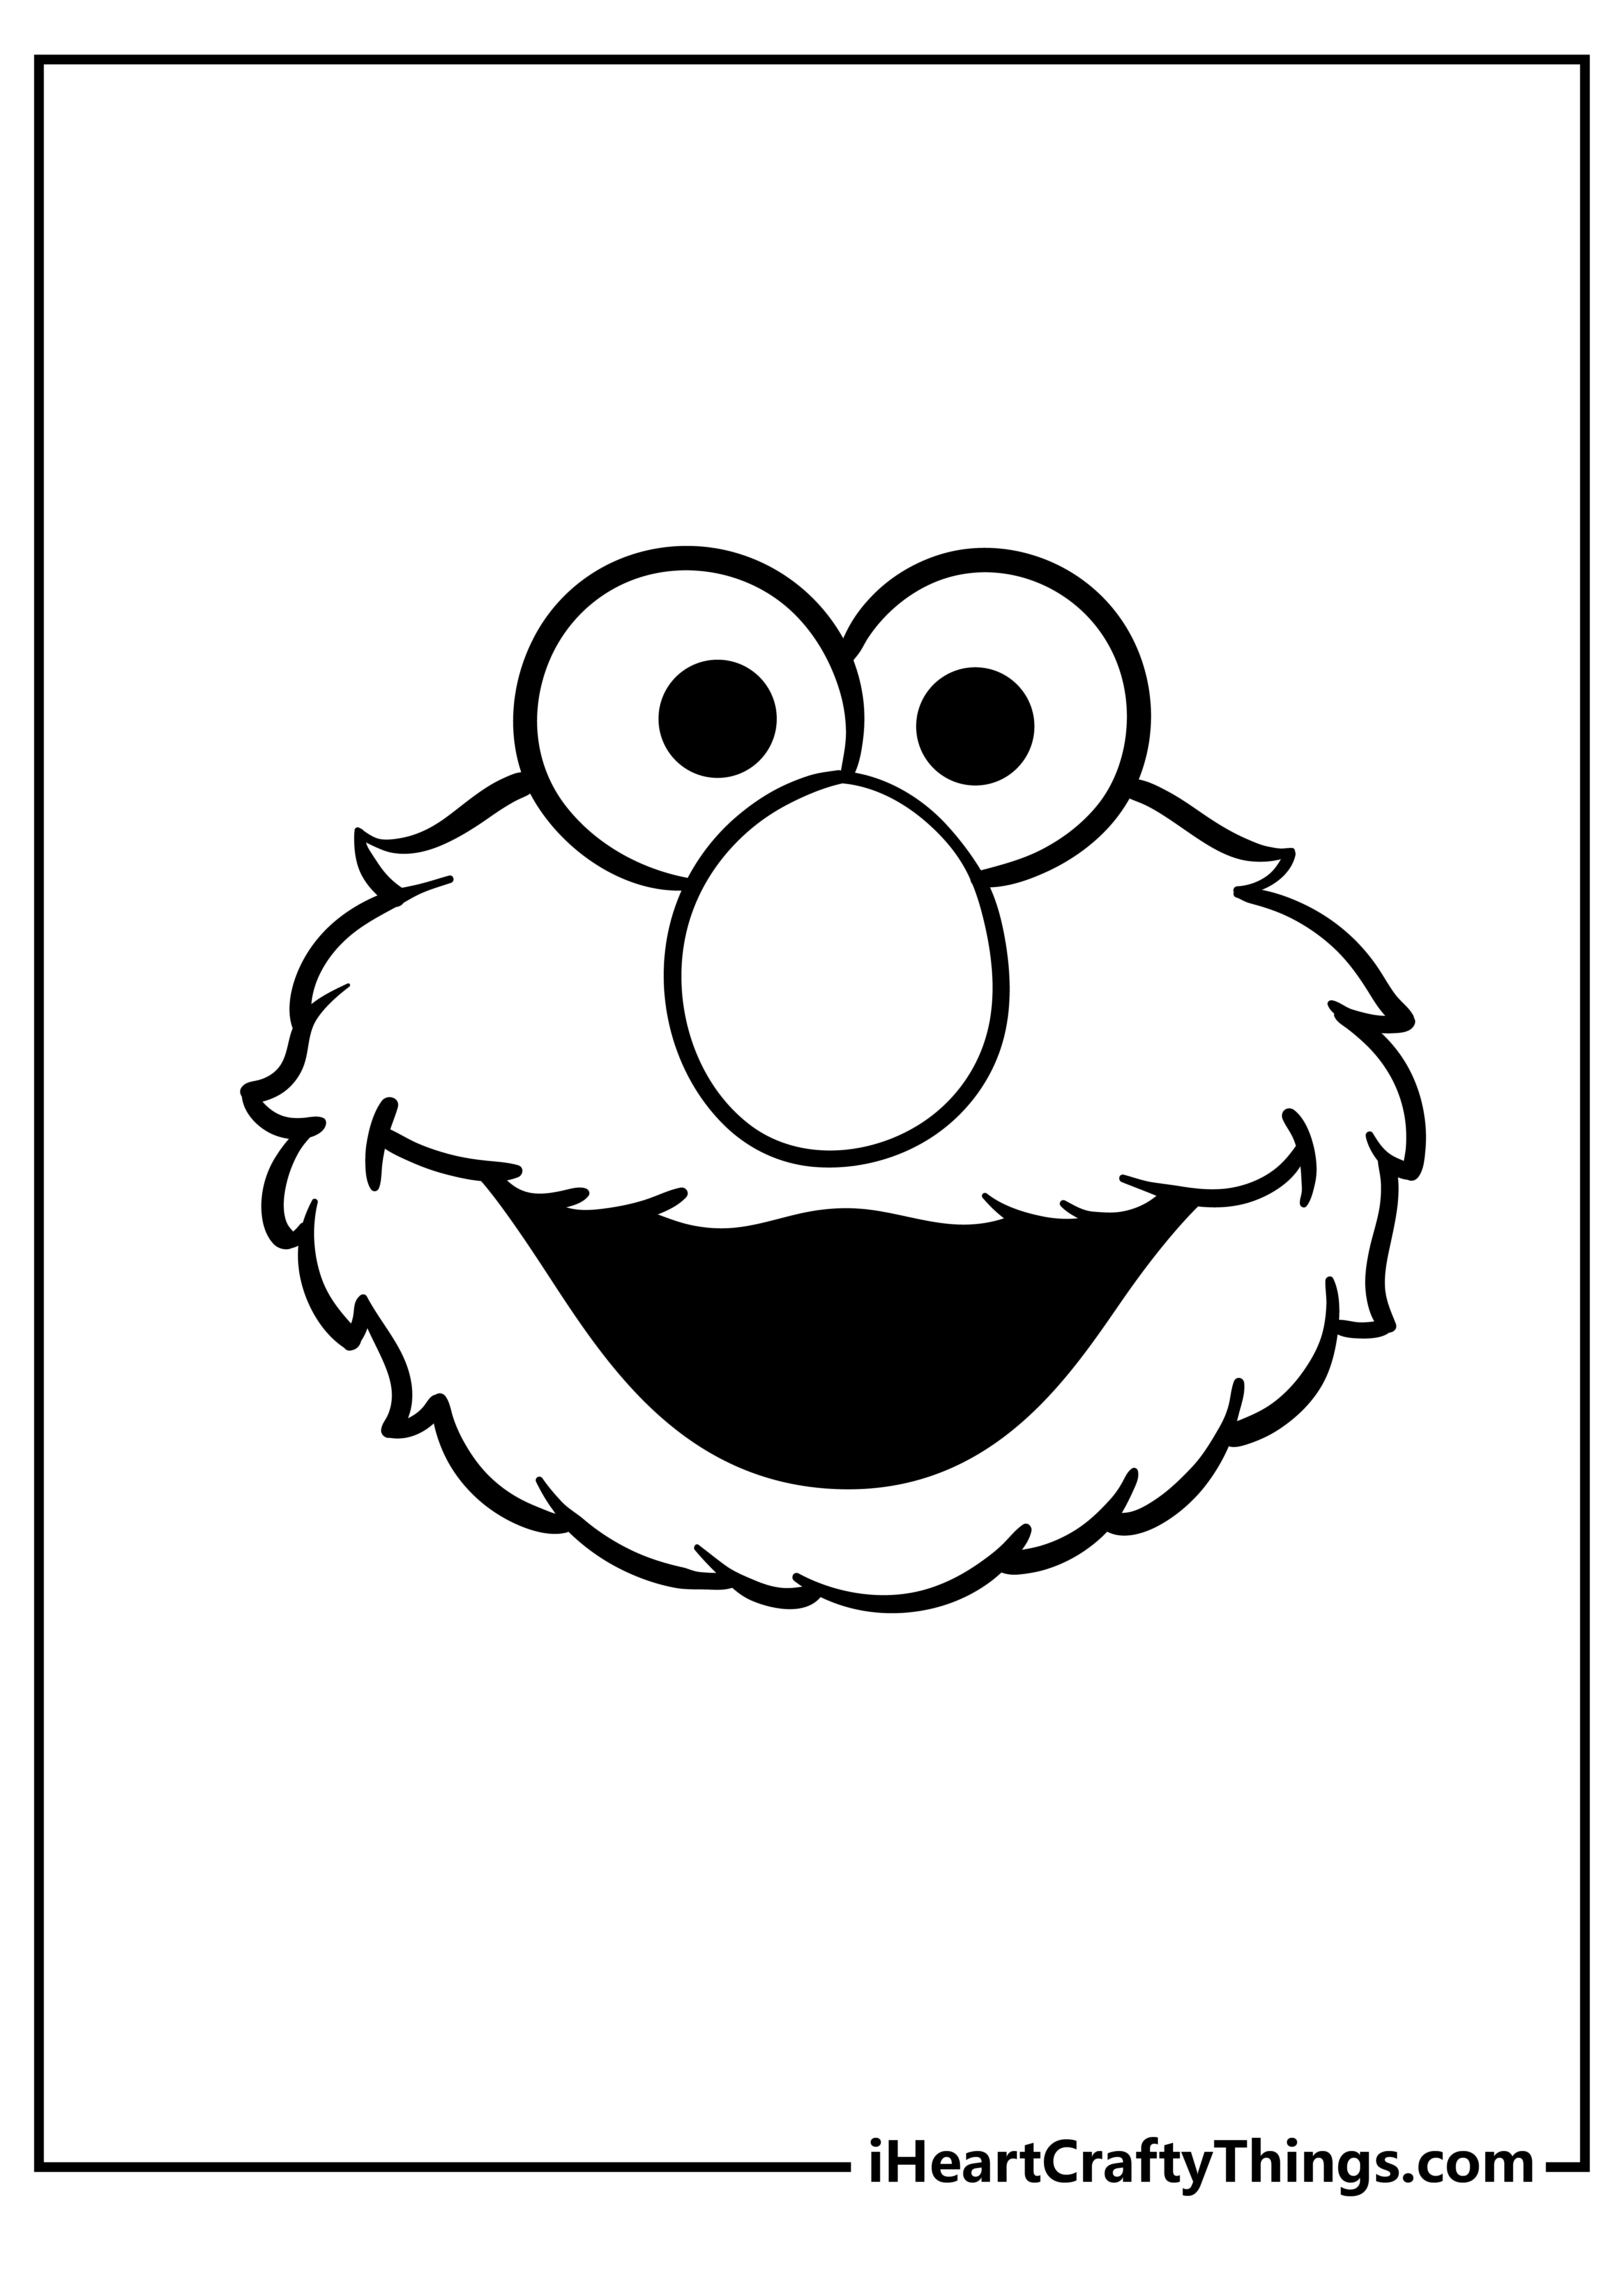 Elmo Coloring Pages for adults free printable